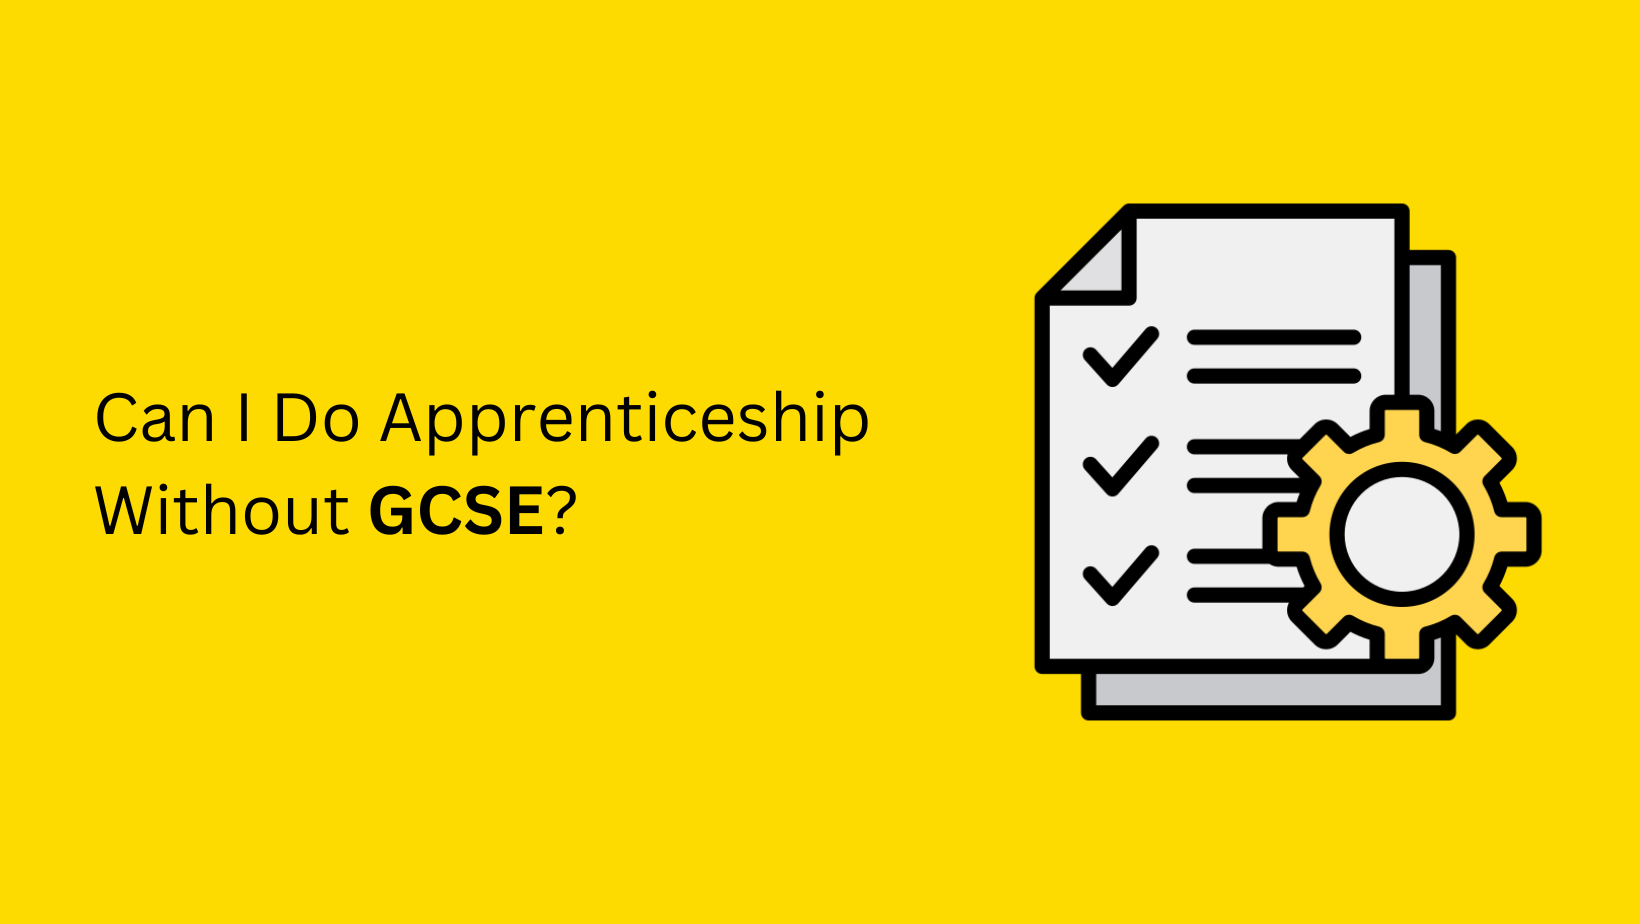 Can I Do Apprenticeship Without GCSE